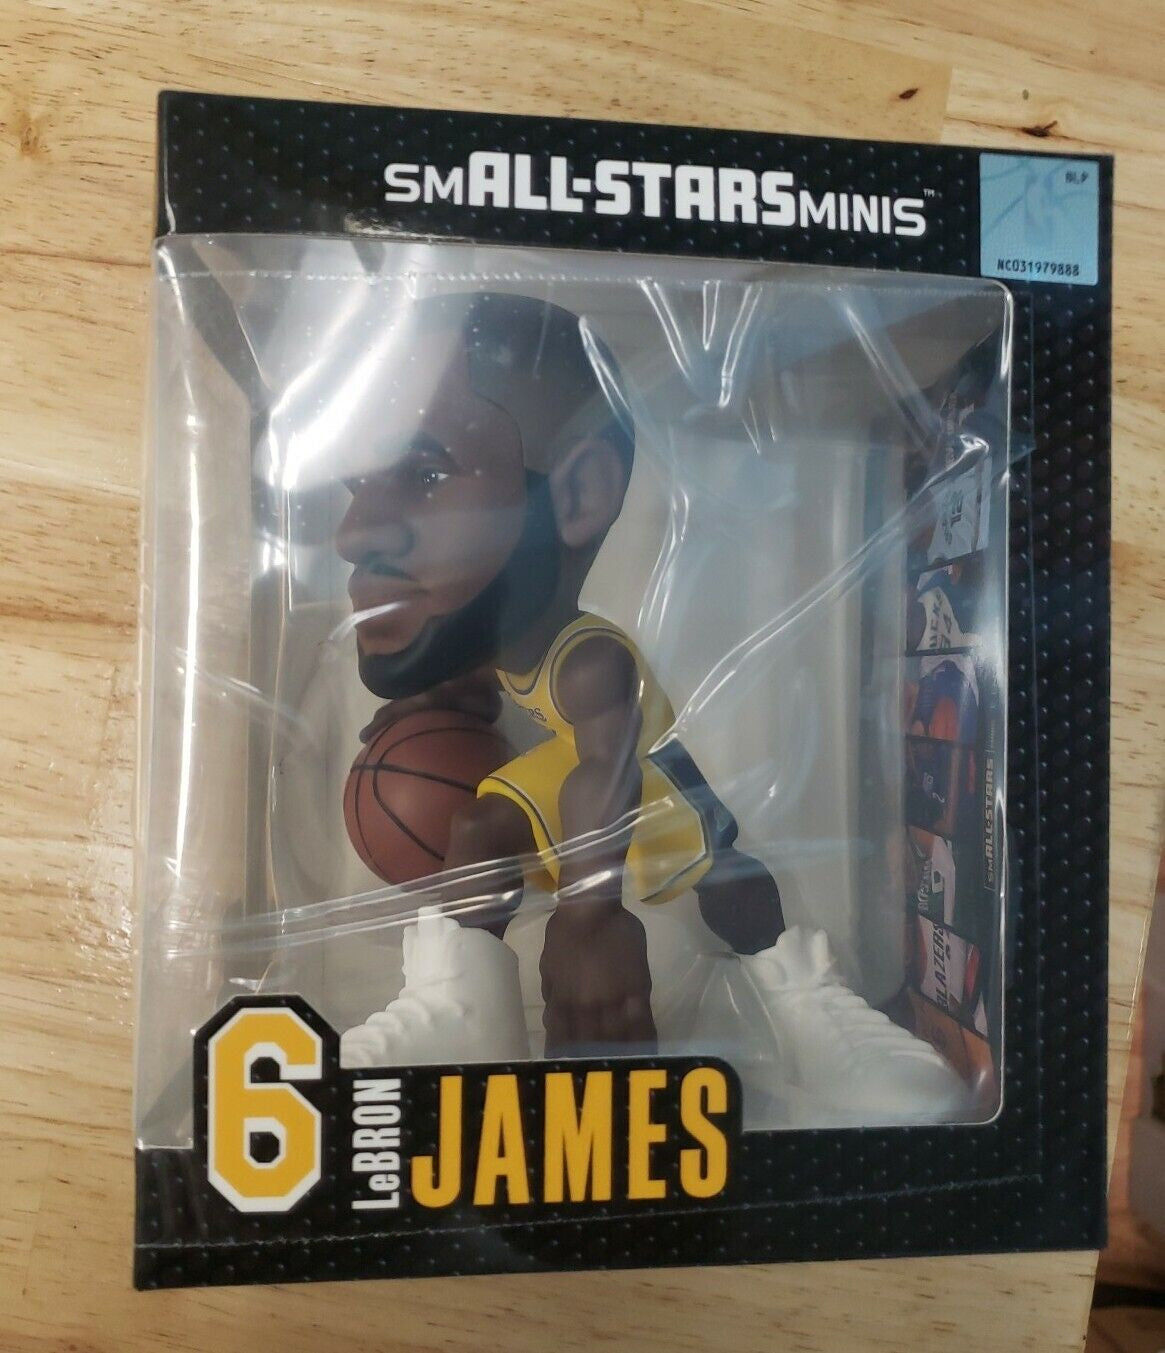 SMALL-STARS MINIS NBA 6" LEBRON JAMES 2021/22 (LOS ANGELES LAKERS #6 GOLD JERSEY)